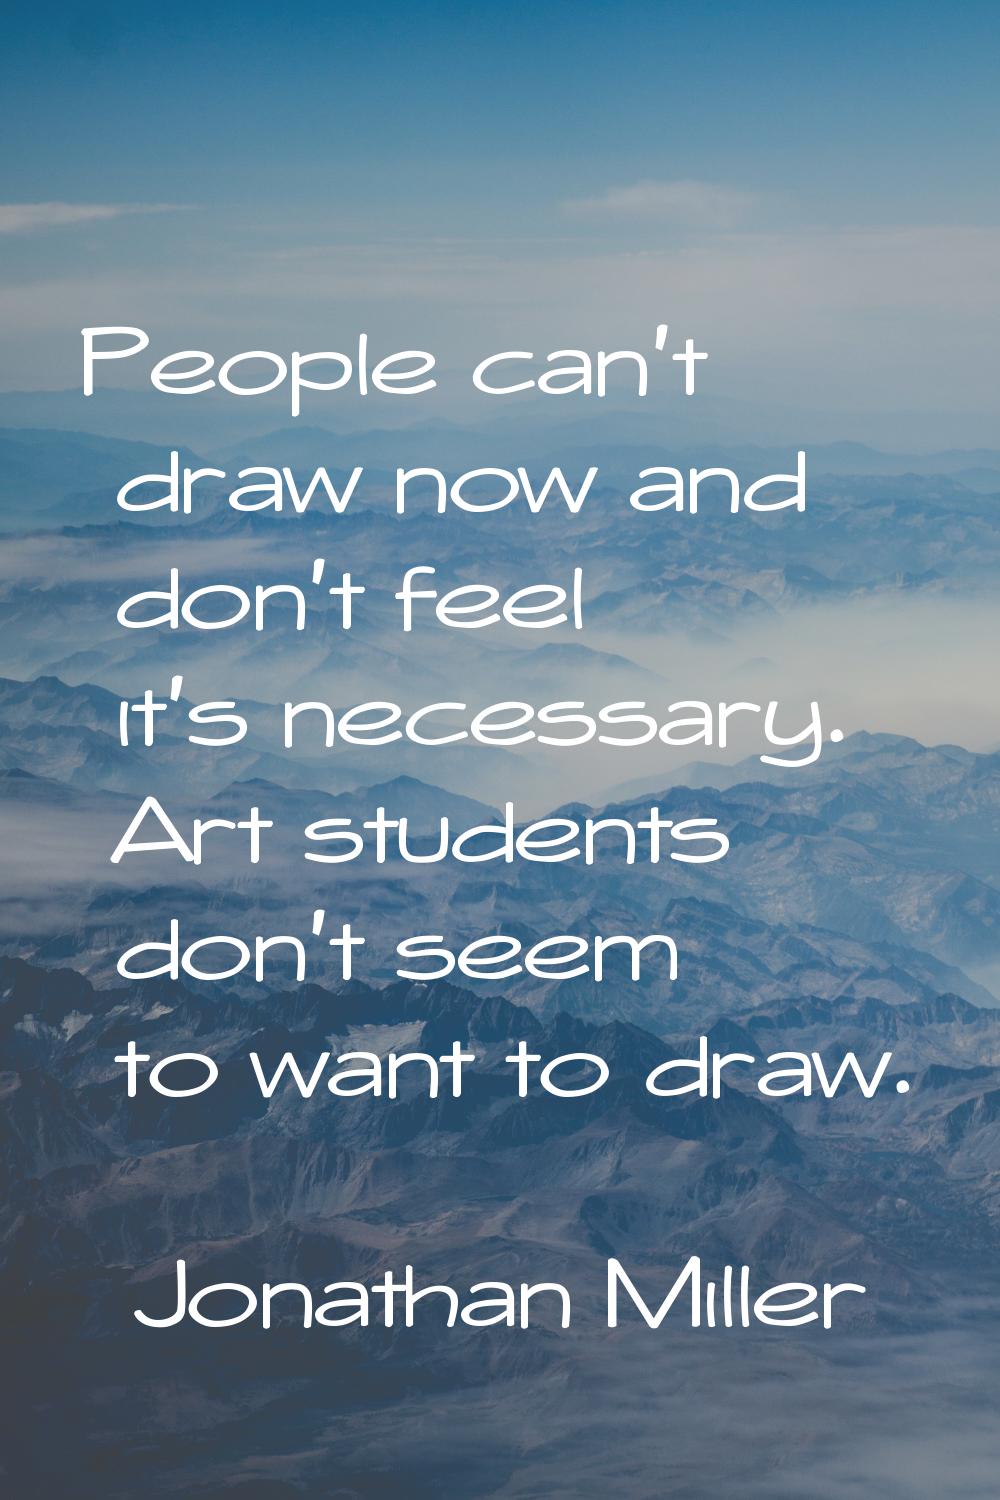 People can't draw now and don't feel it's necessary. Art students don't seem to want to draw.